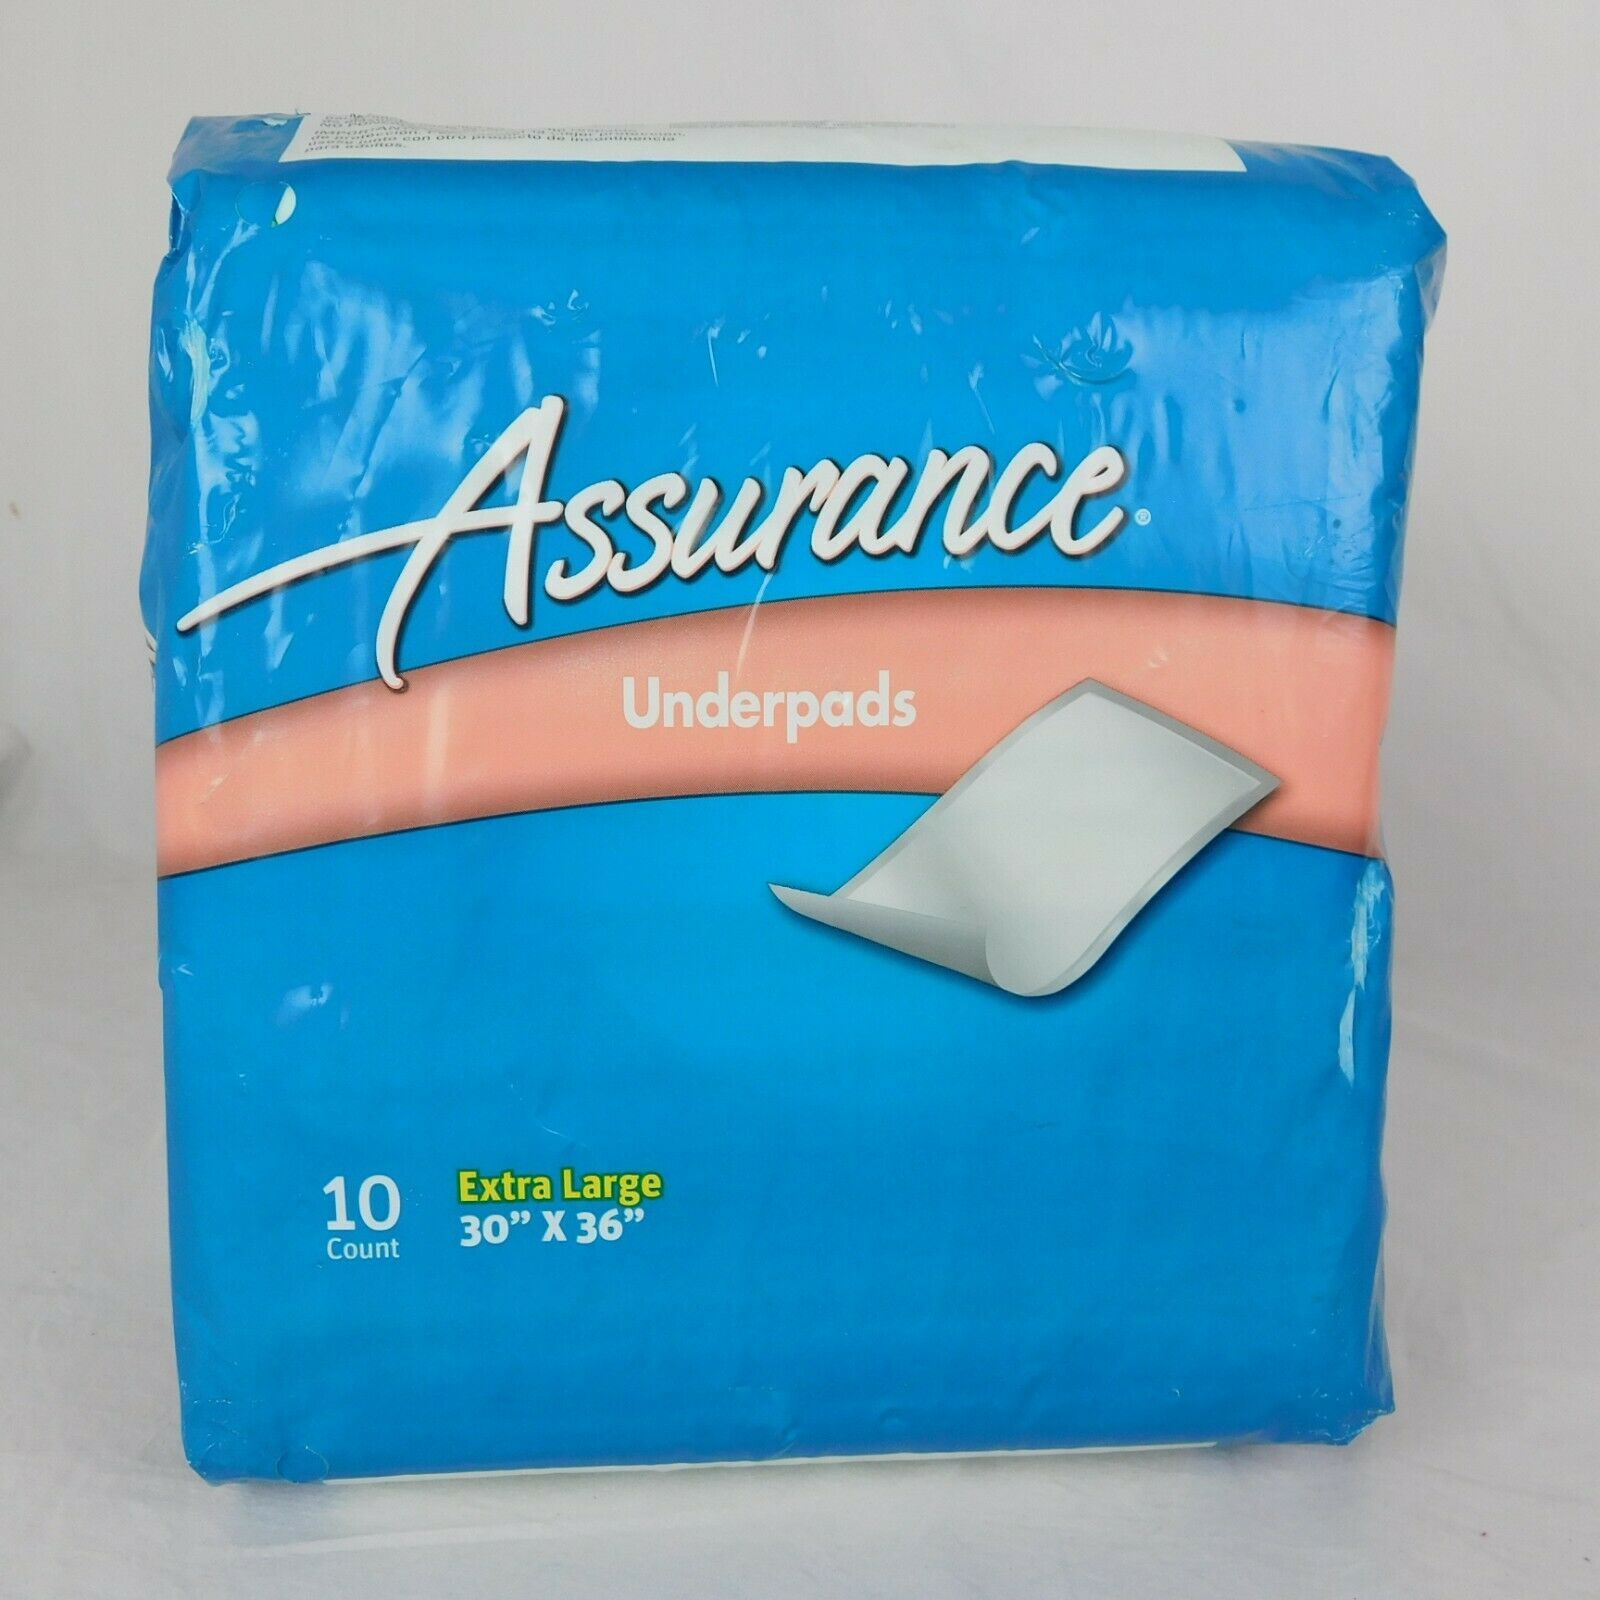 NOS Assurance Underpads Extra Large 10 Count 30" x 36" Liquid Absorption Adult - $5.95